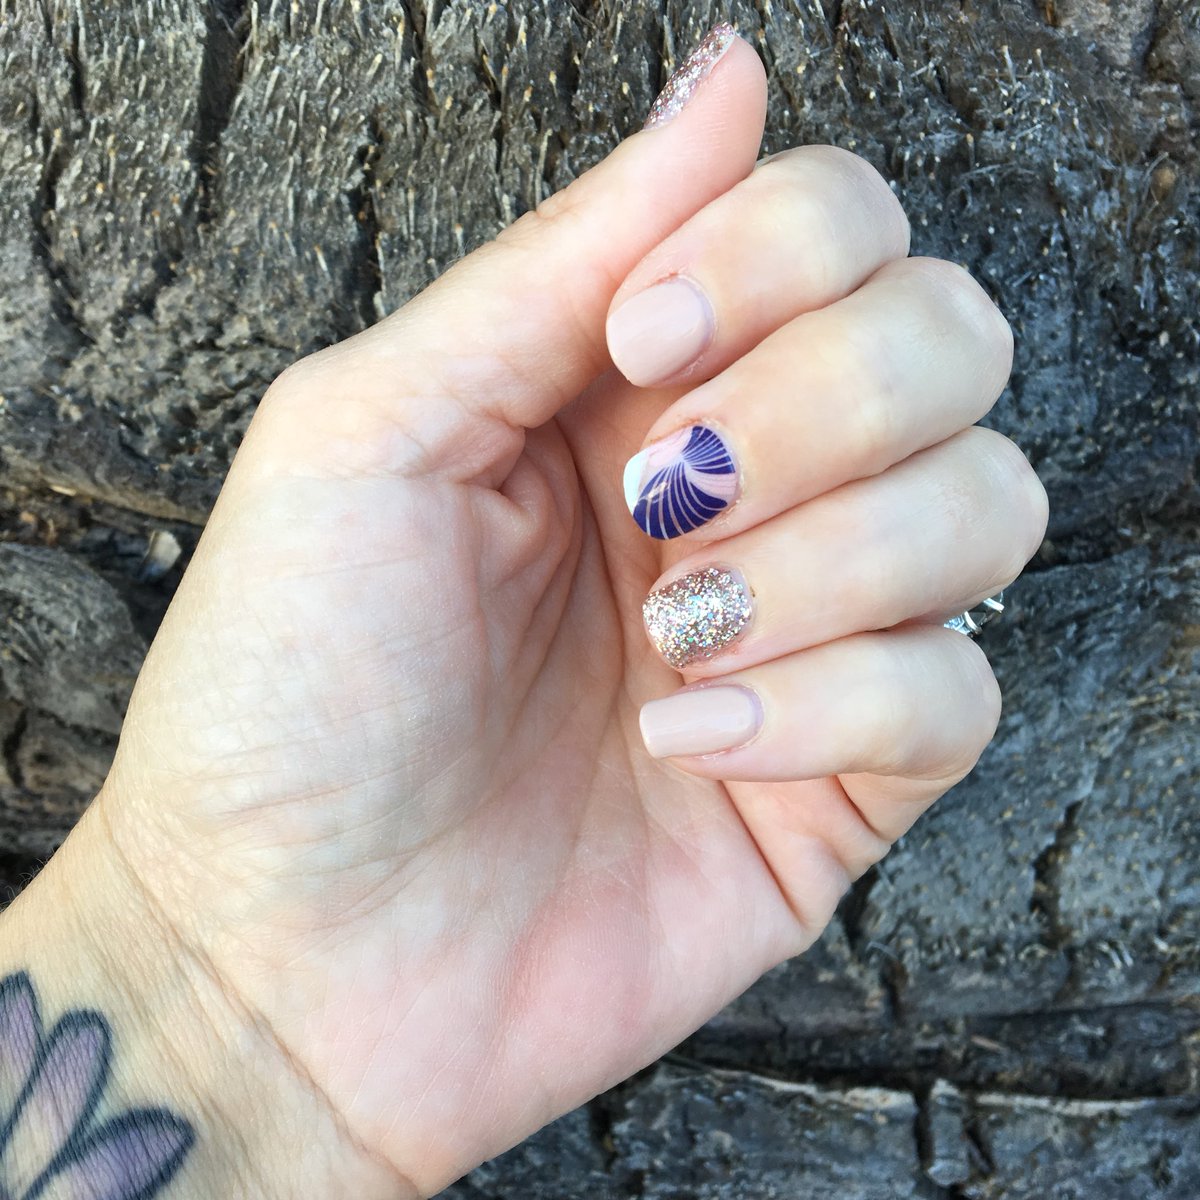 I pampered myself with a cute new Mani! I can’t brag enough about our TruShine gels! #jamberry #gelnails #gelmani #manicure #prettynails #vegan #glutenfree #crueltyfree #nails #nailshop #trending #ontrend #diynails #diymani #sparklegel #sparklenails #simple #love #happy #trushine